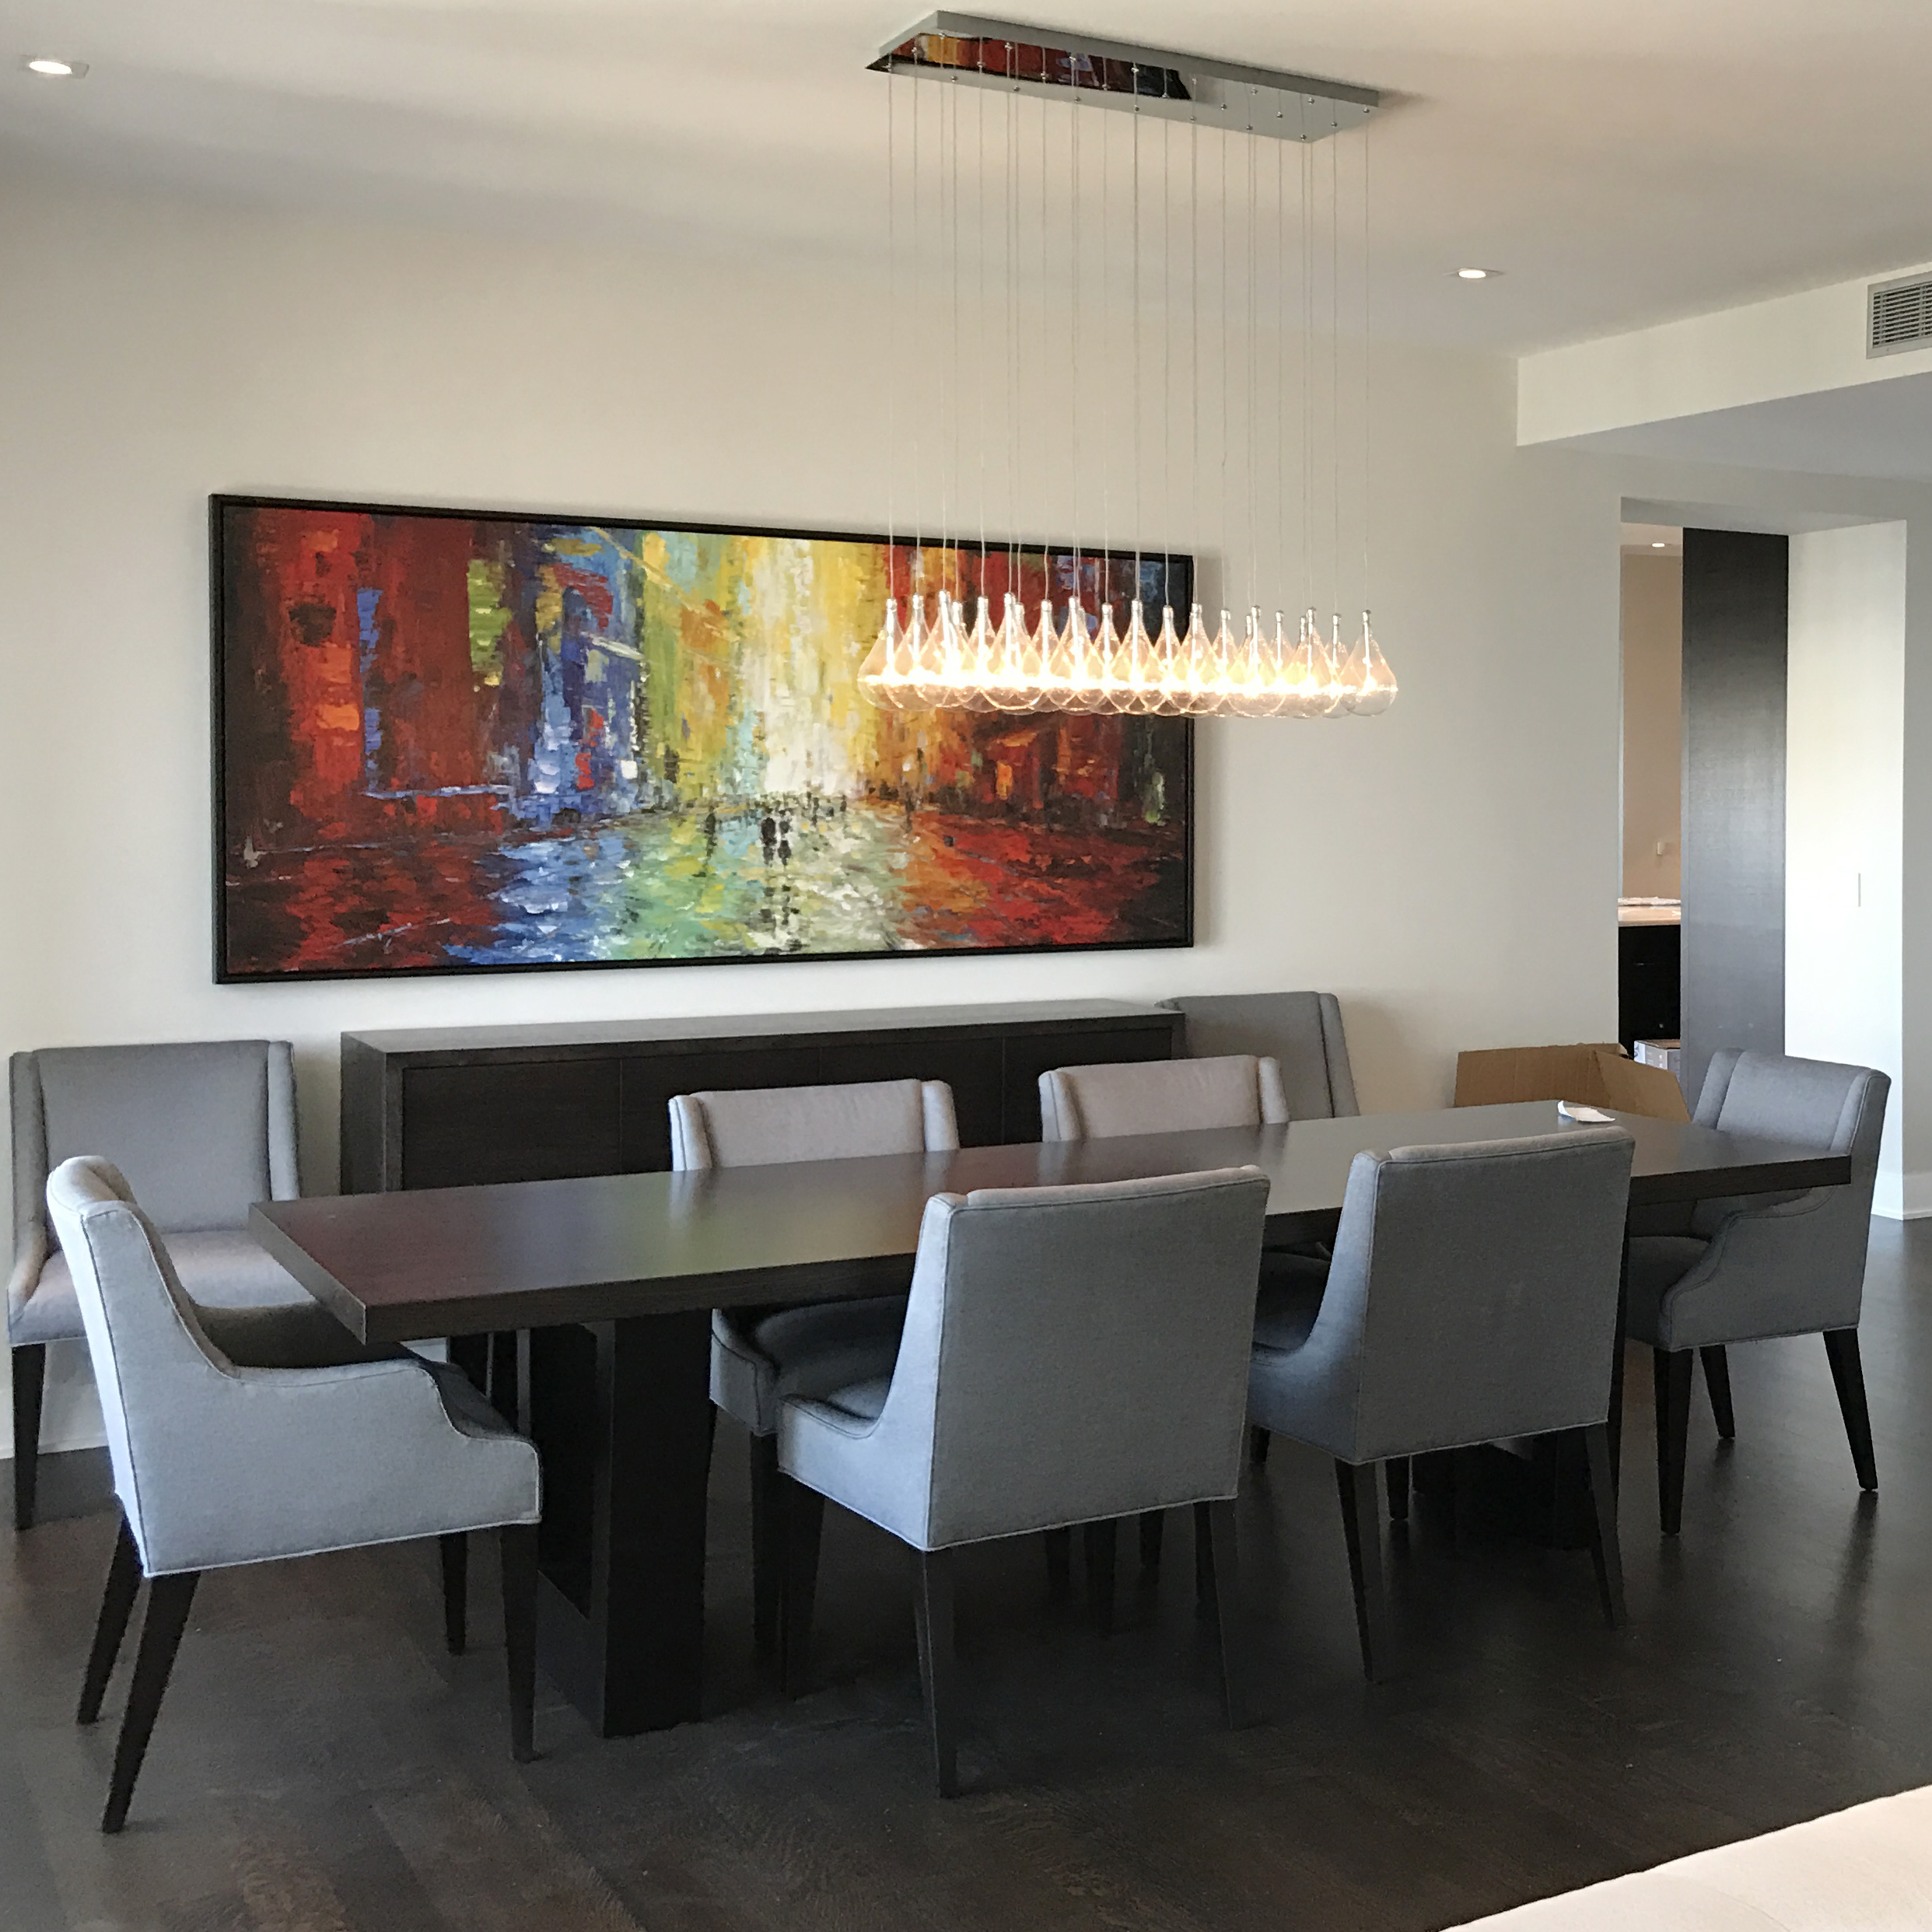 Peterson Picture Co.'s experts in trade framing can provide a unique framing design to meet any residential, hospitality, or other bulk orders. An example is this meeting room frame that blends perfectly in the interior design to accompany the long rectangular table with several gray chairs in the middle showcasing a large, horizontal, colorful art piece on the wall.